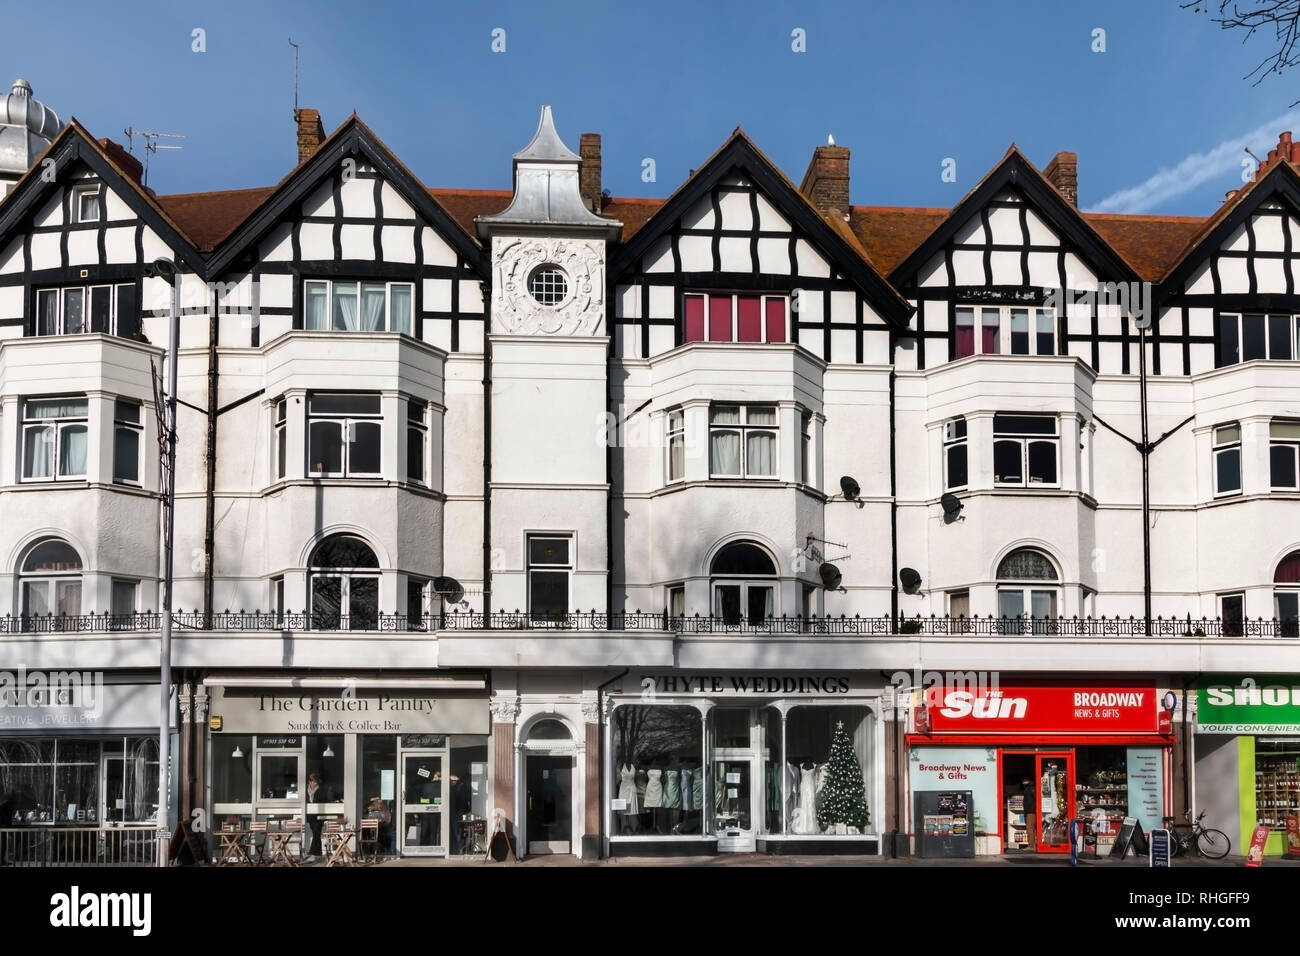 Urban view of Worthing, West Sussex, UK featuring a parade of shops Stock Photo